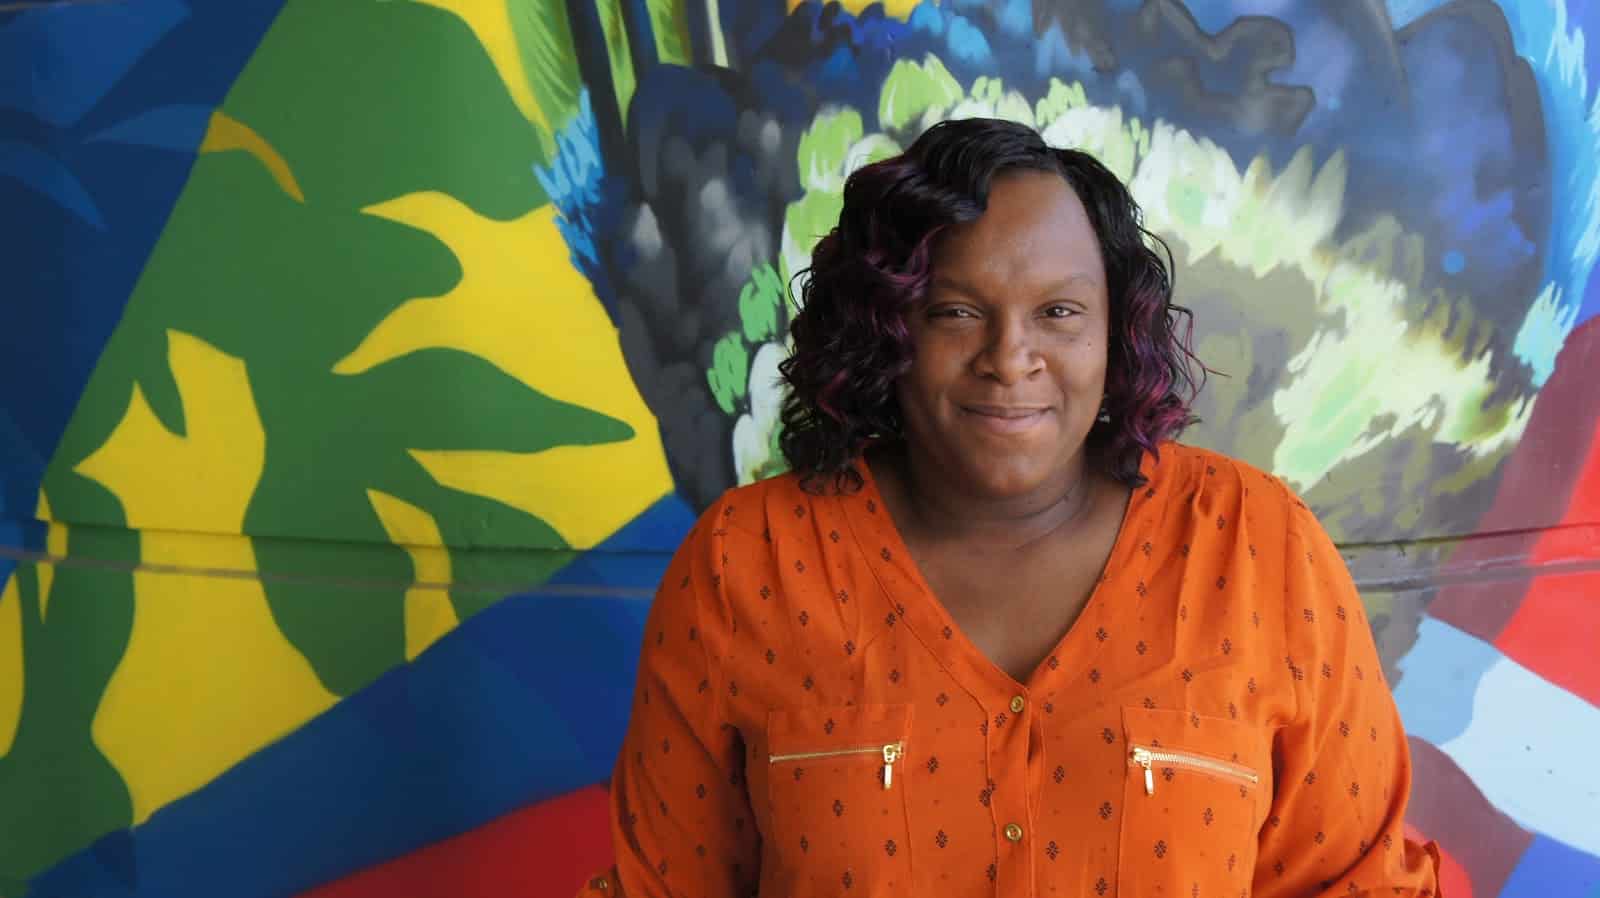 Keyona found meaningful employment after participating in Mi Casa Resource Center's entry-level training program.